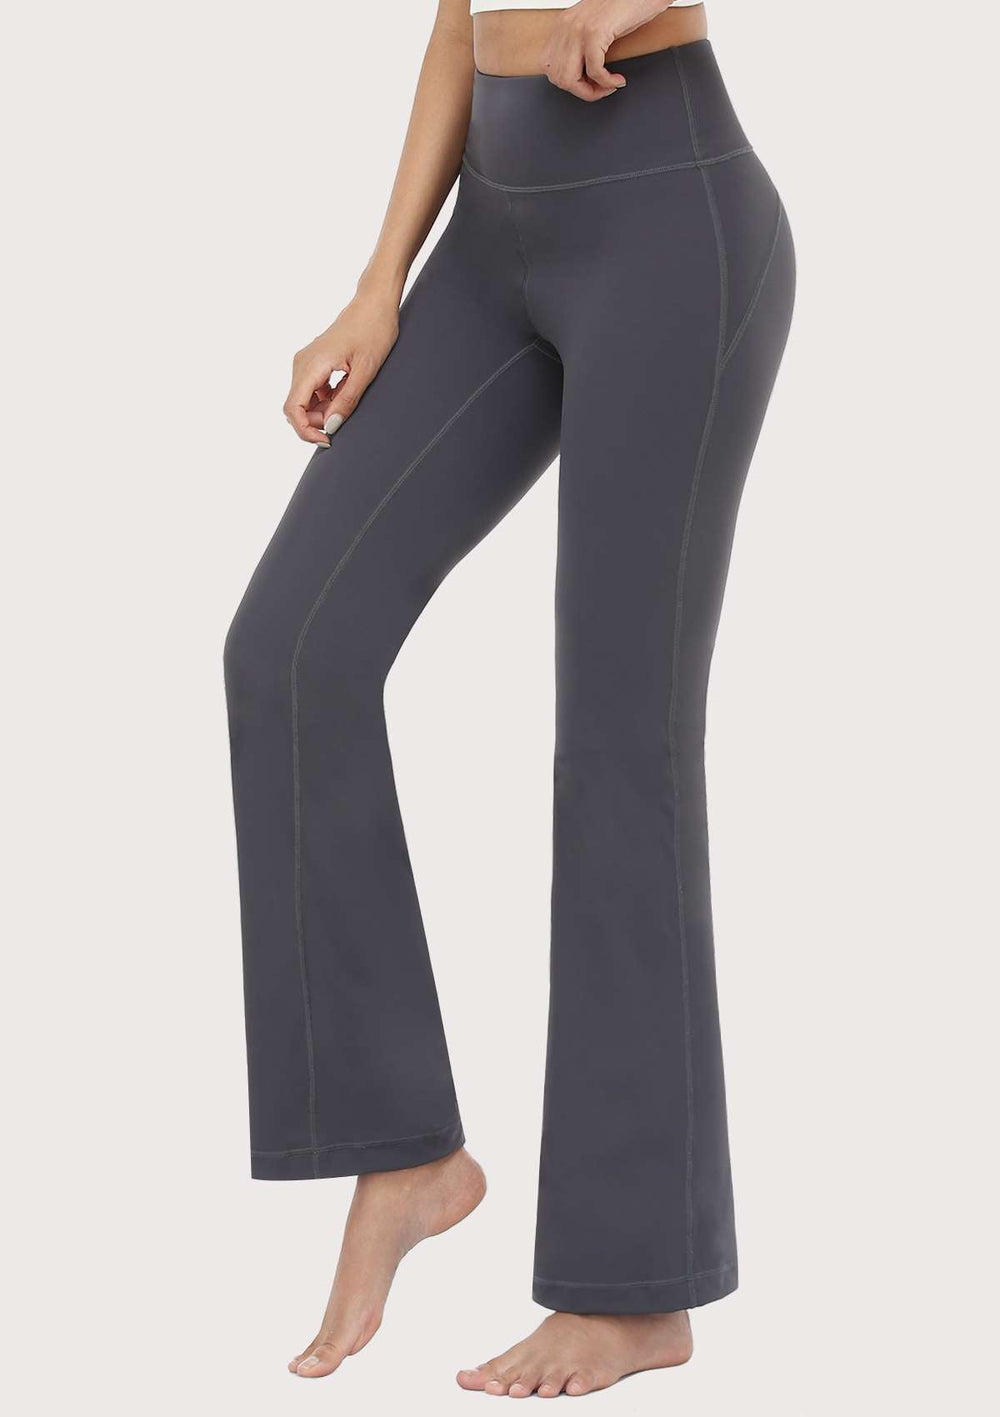 SONGFUL Smooth High Waisted Bootcut Yoga Sports Pants – HSIA